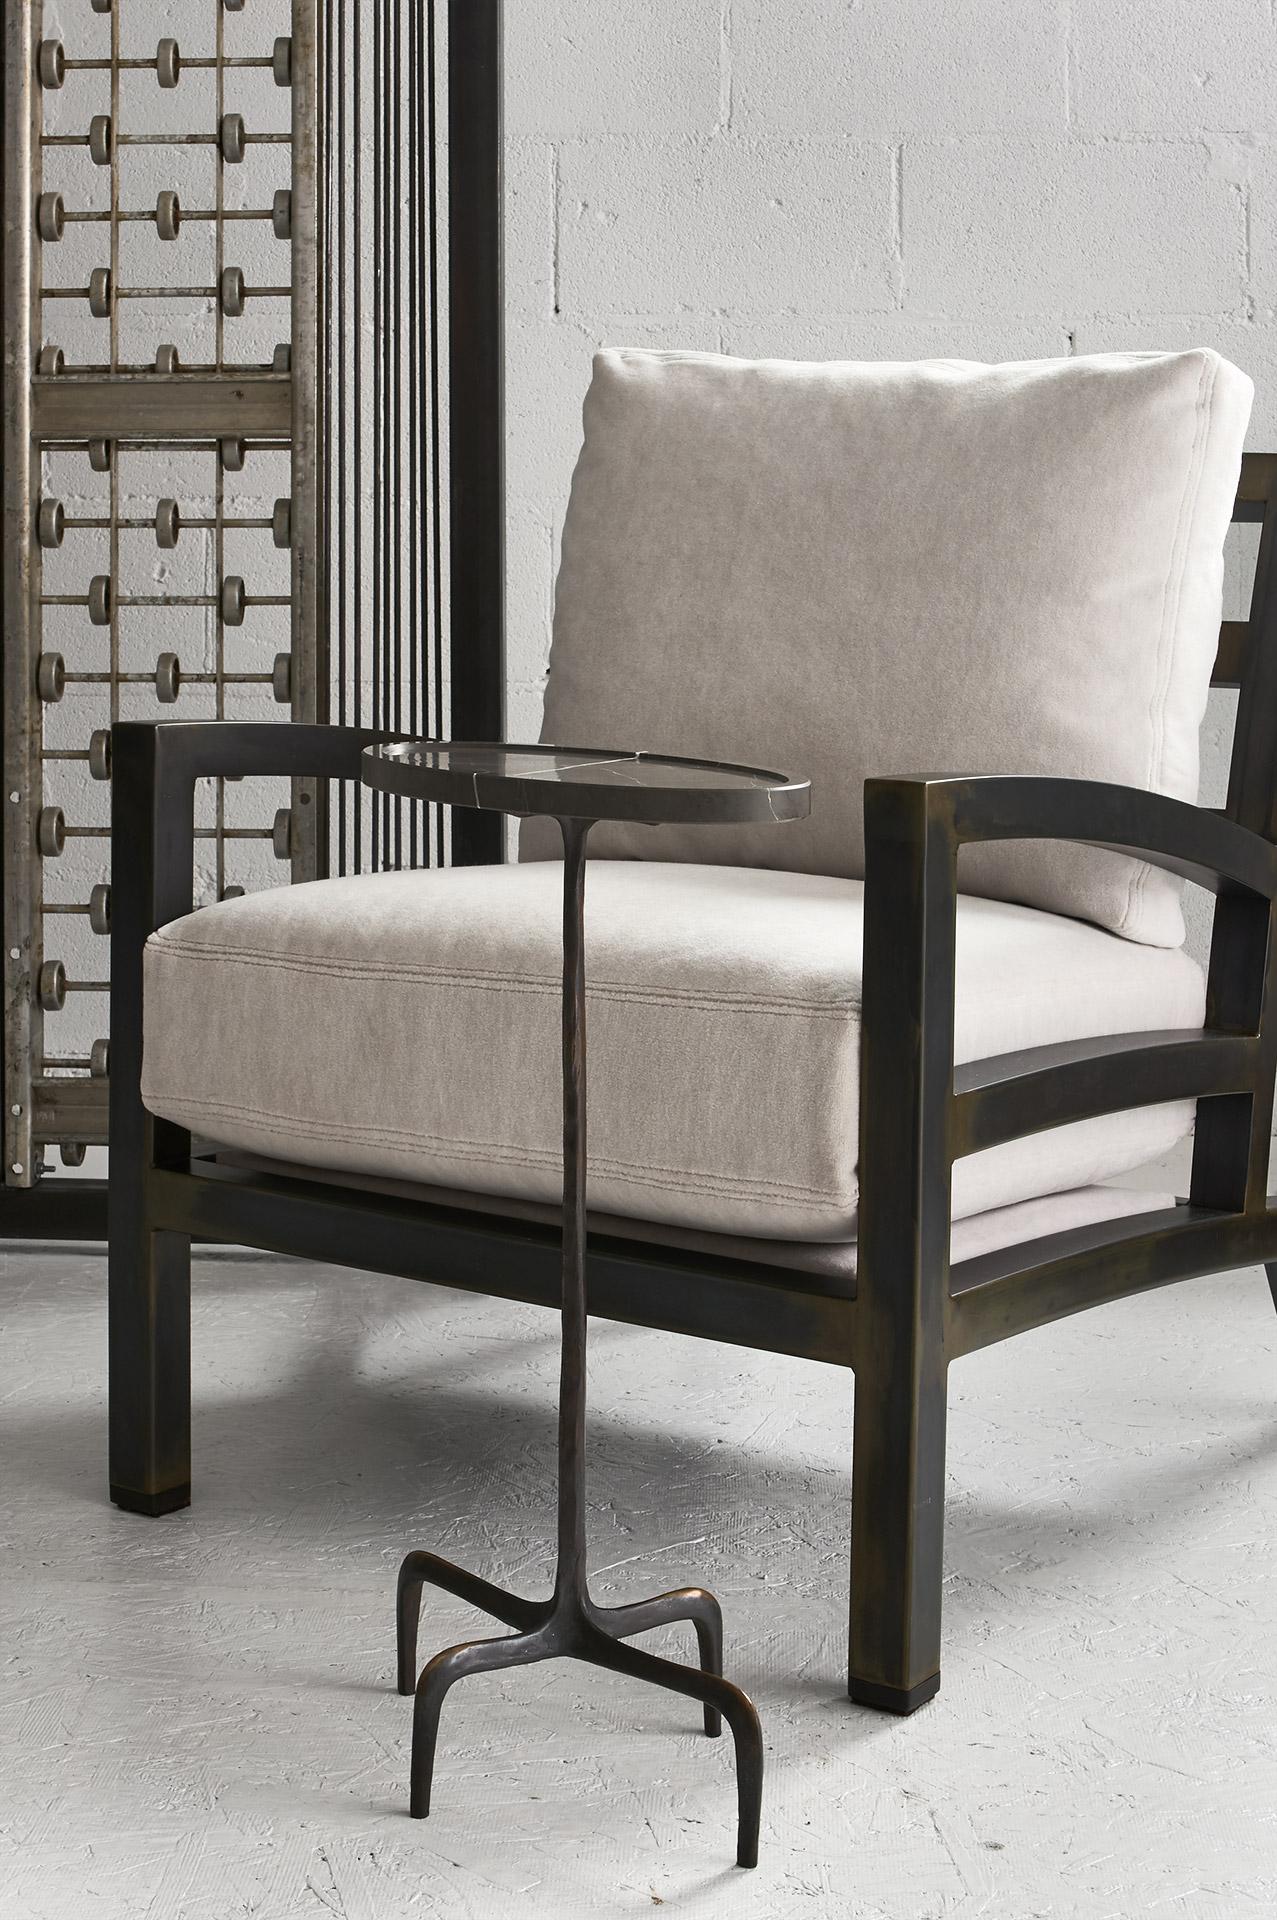 A mature reflection on the urban lounge chair, TX6315 is both urban and rustic - meant to weather the storm and be passed down to future generations. Fabricated by master craftsman Jacob Wener of Modern Industry Design the TX6315 is a sleek handmade